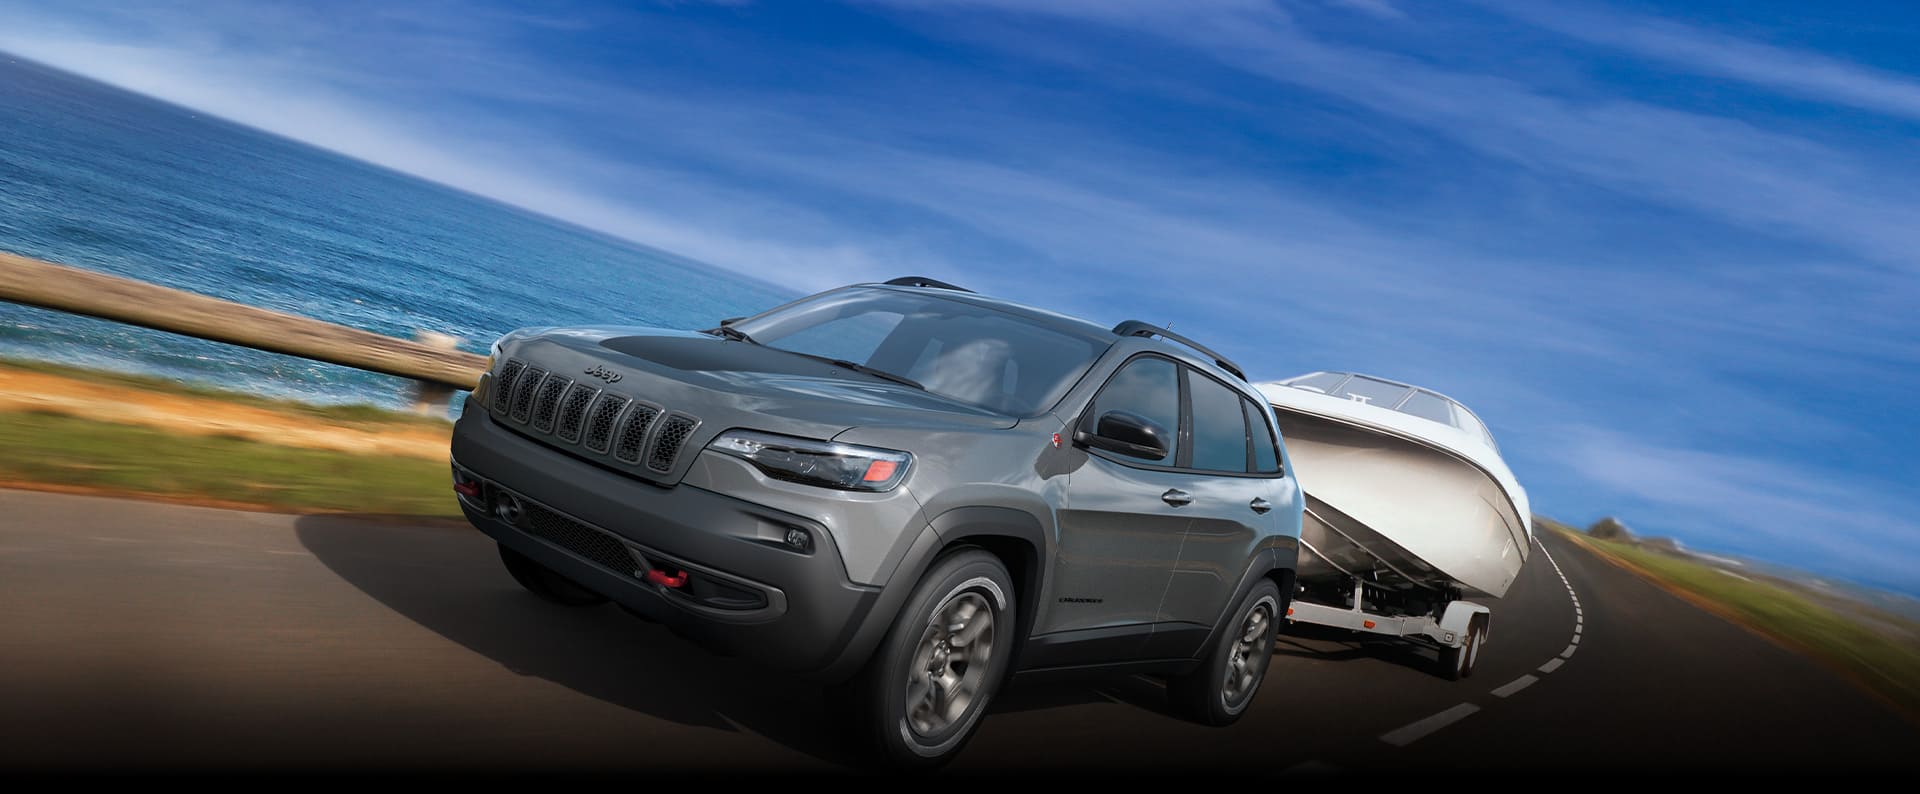 The 2022 Jeep Cherokee Limited towing a boat.